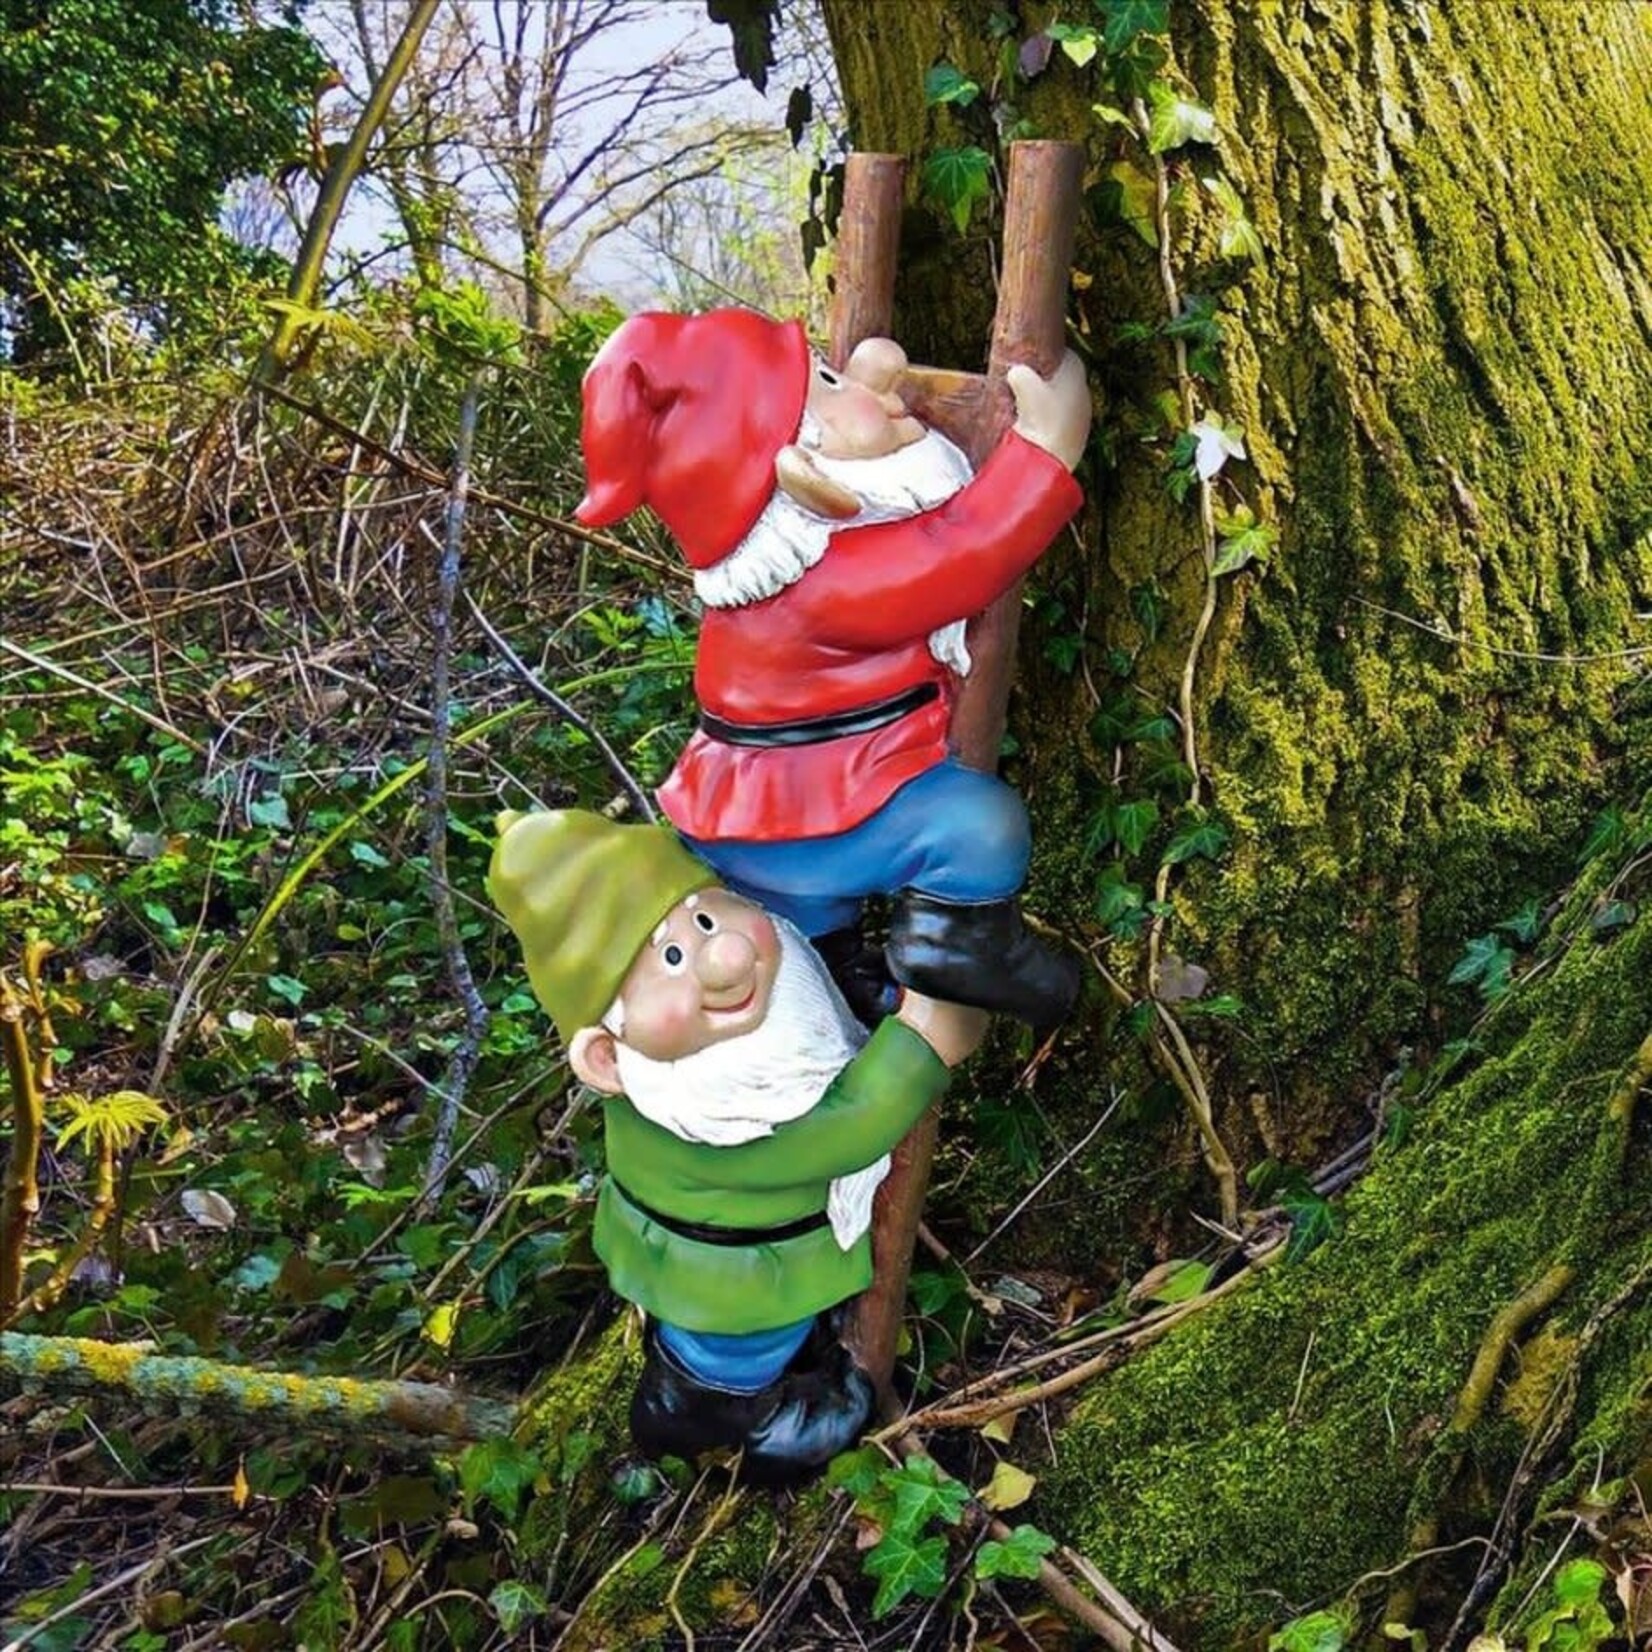 Up the Ladder: Climbing Garden Gnome Statue (I-6)